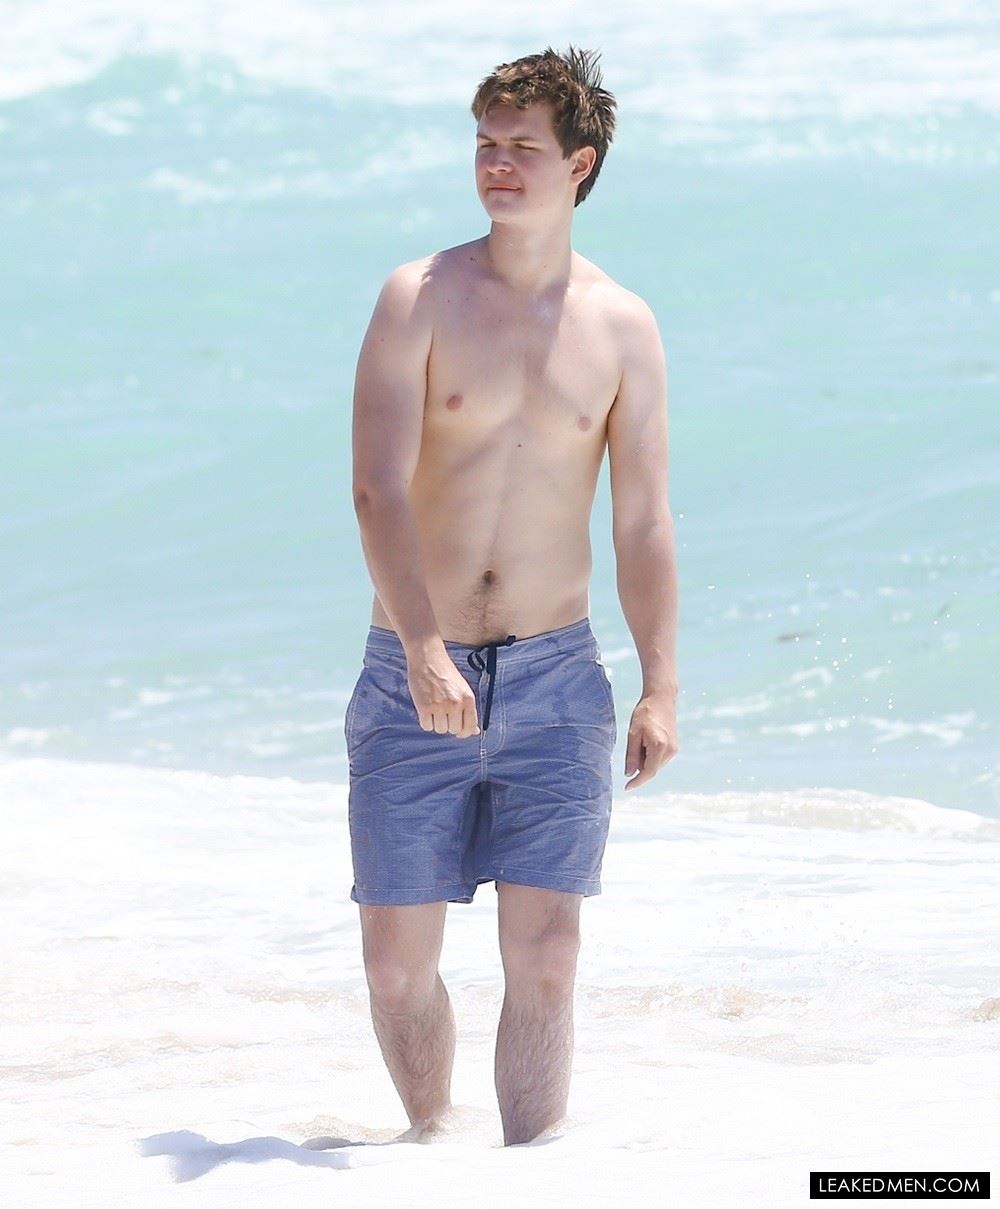 Ansel Elgort Penis Pics And Leaked Nsfw Videos 2020 Leaked Men 